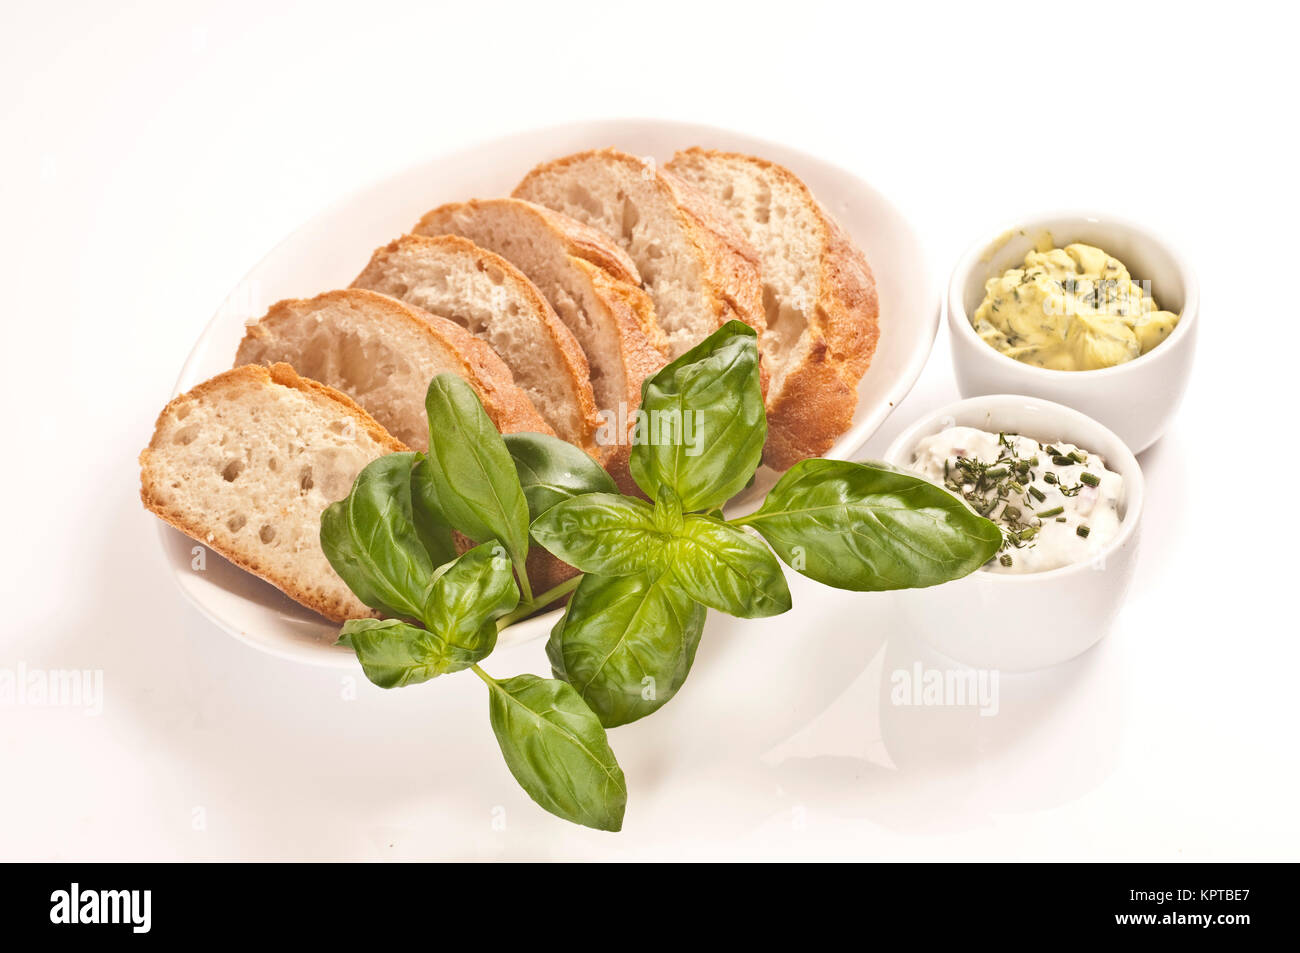 Fresh bread with herb butter and herb quark Stock Photo